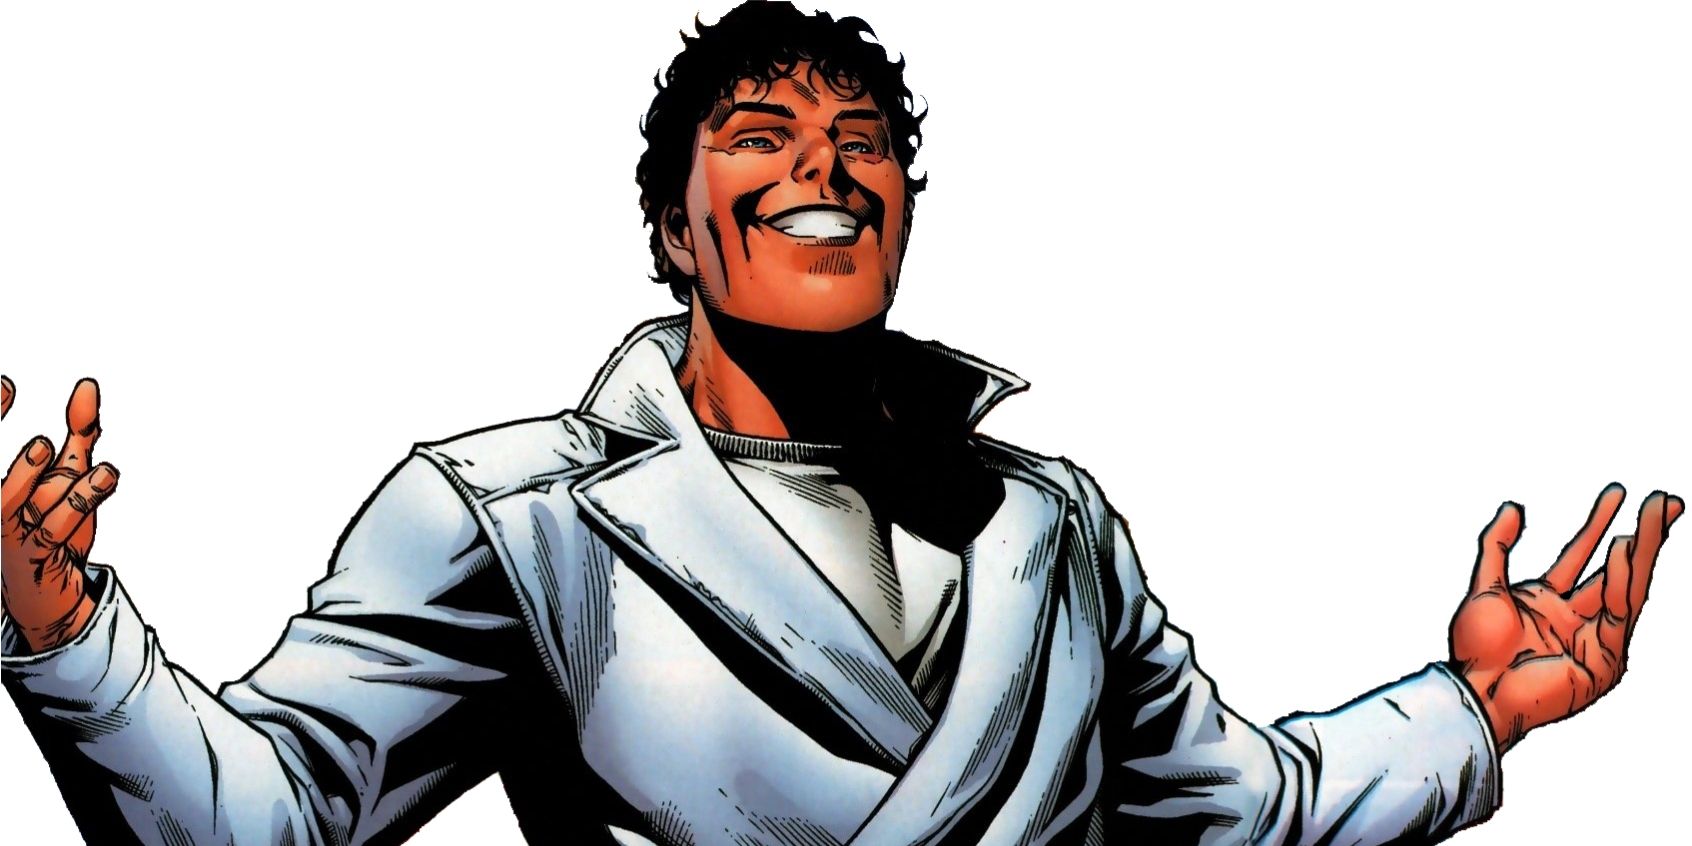 The Beyonder spreads his arms in Marvel comics